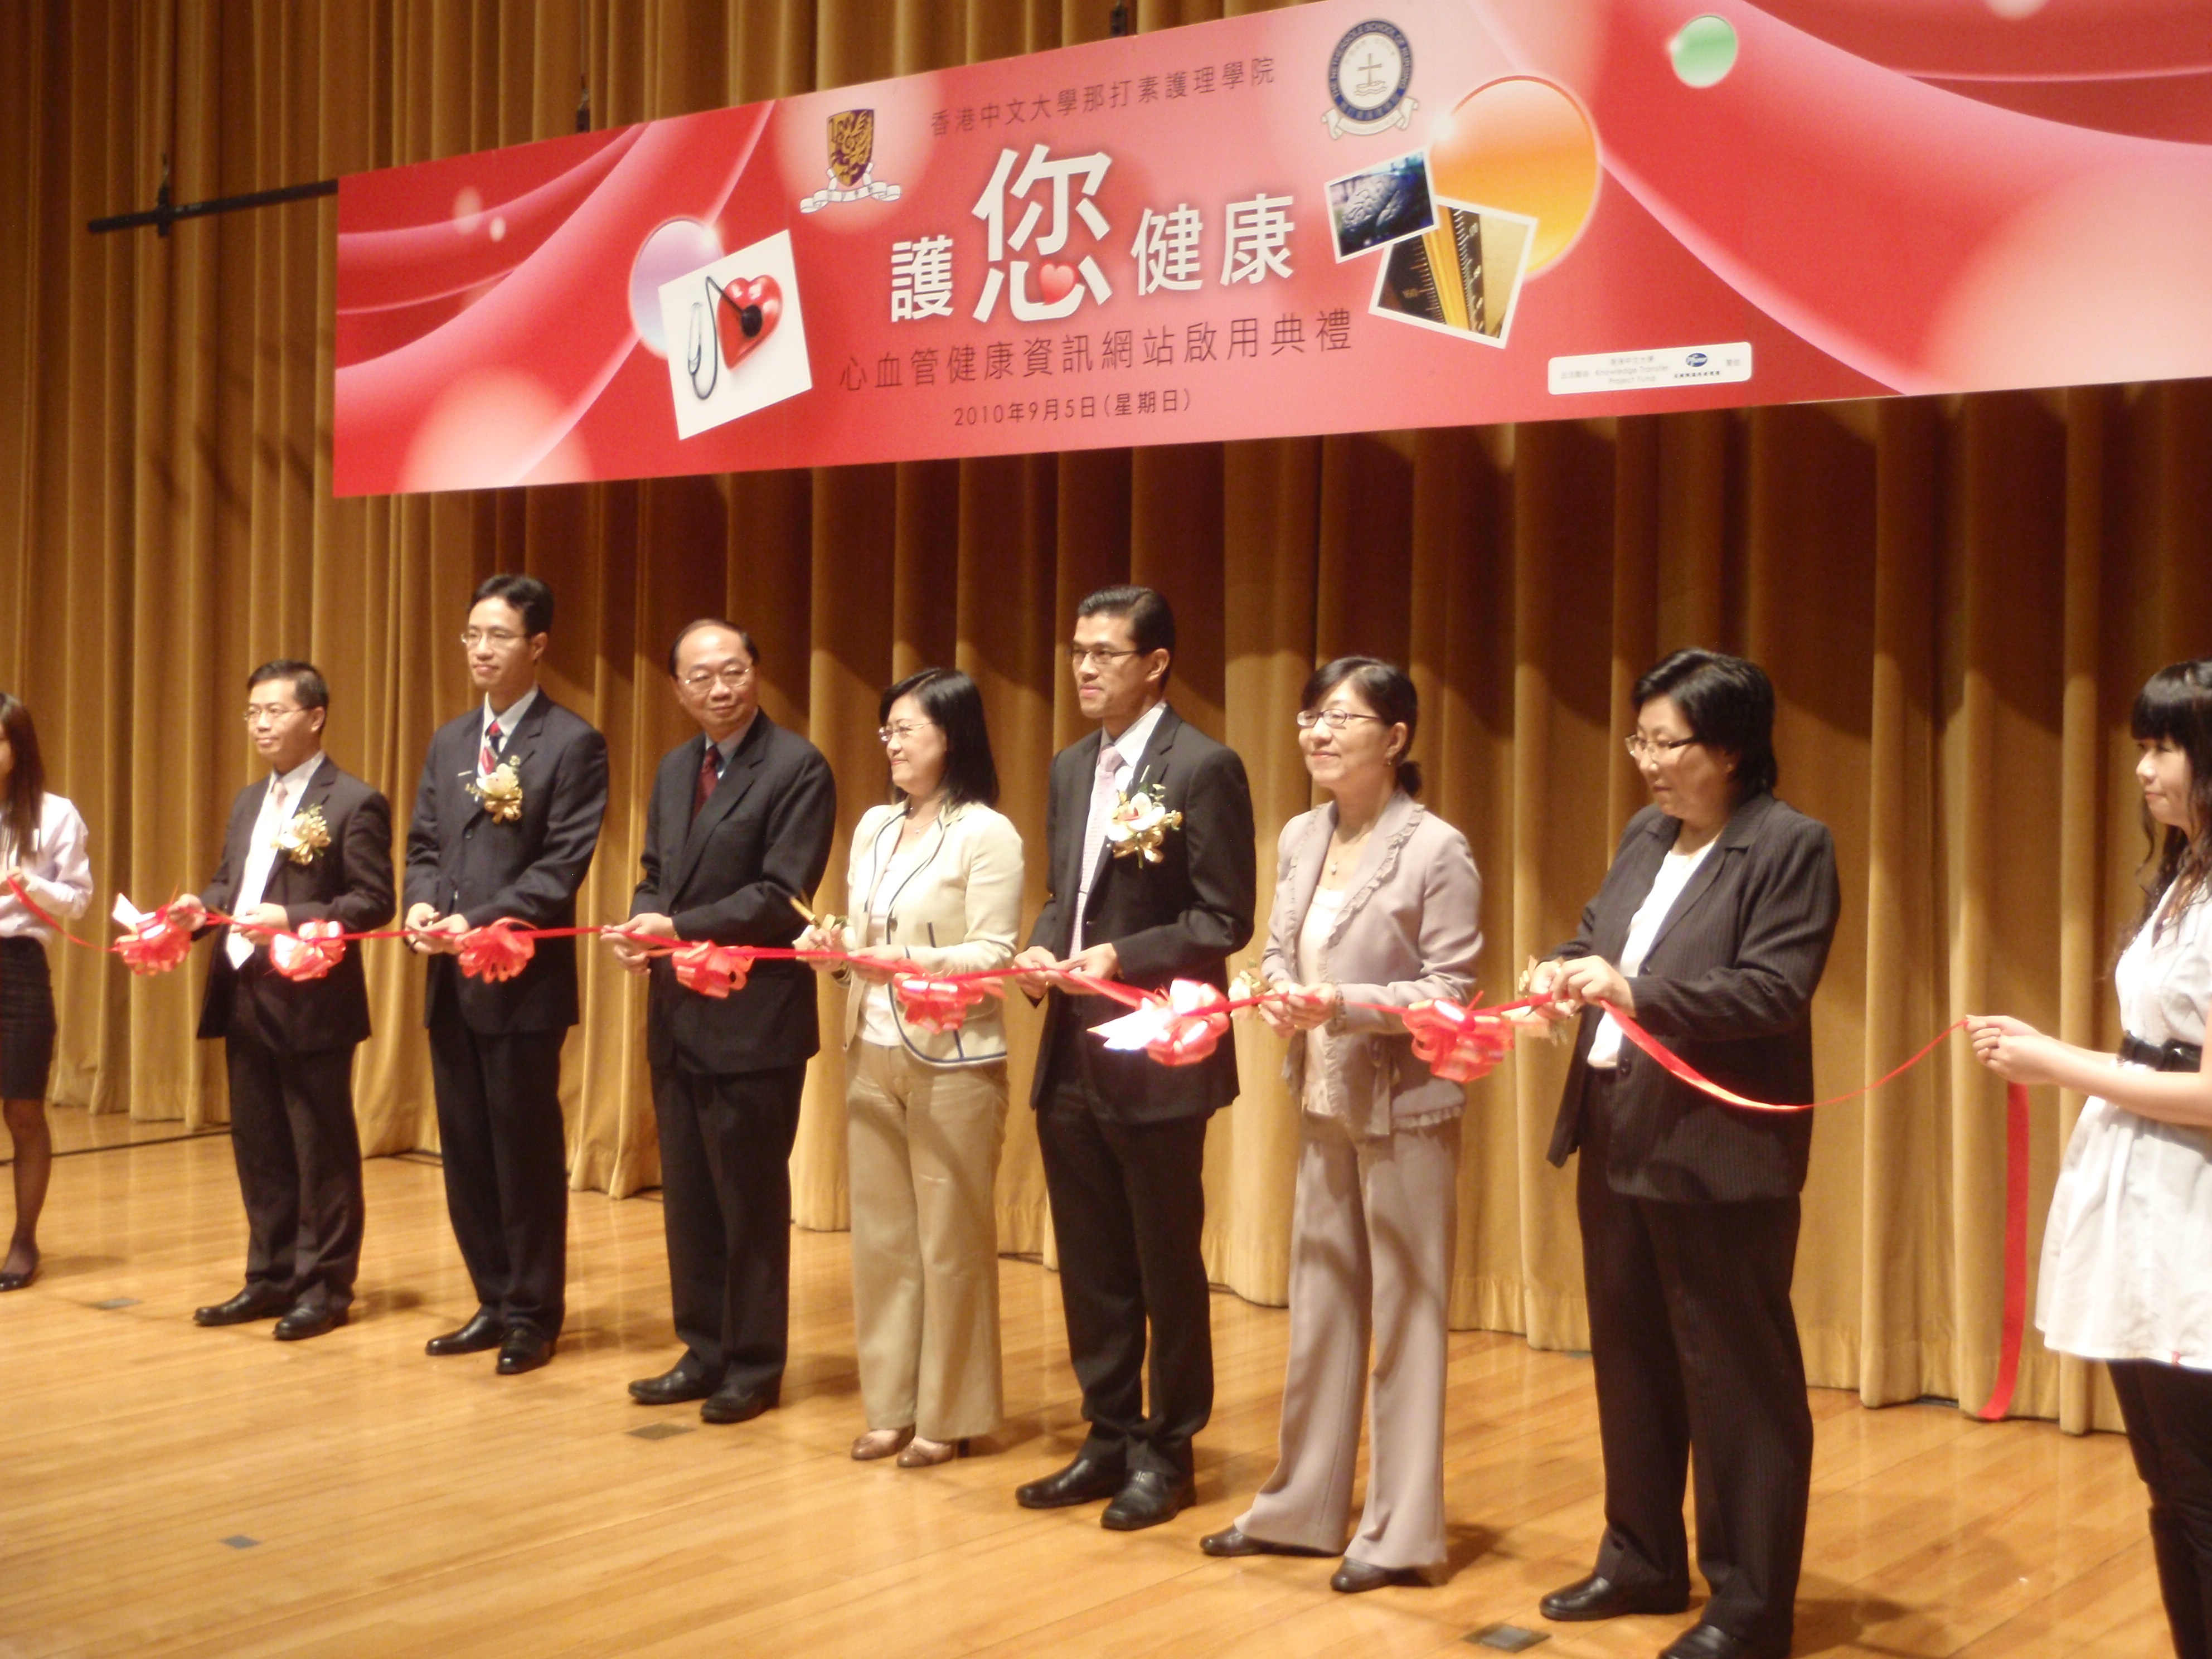 Project opening ceremony.